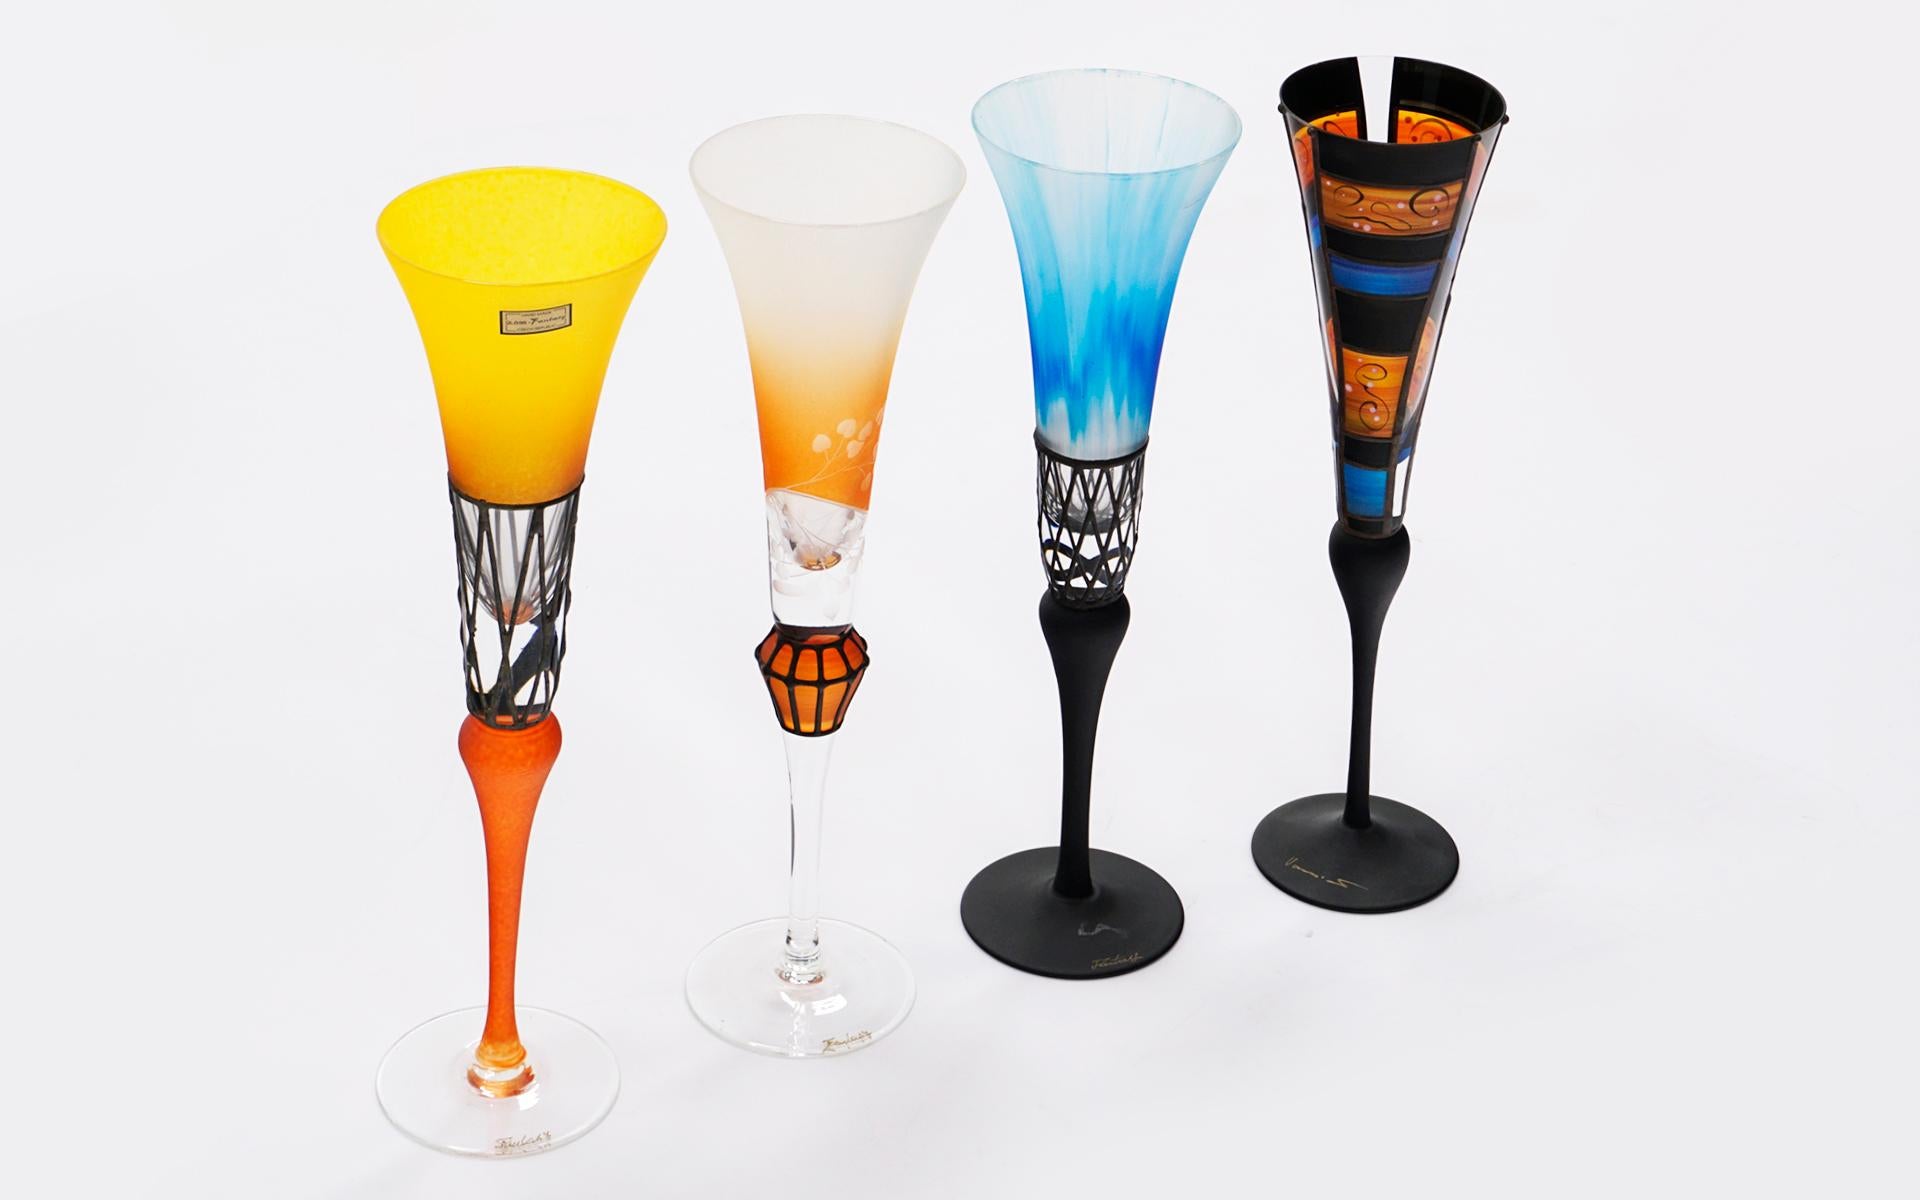 Set of four art glass champagne flutes from the Czech Republic. Three are marked Fantasy and one has a different mark as seen in the photos. That glass is slightly shorter than the other three as you can see if you look closely at the photos. All